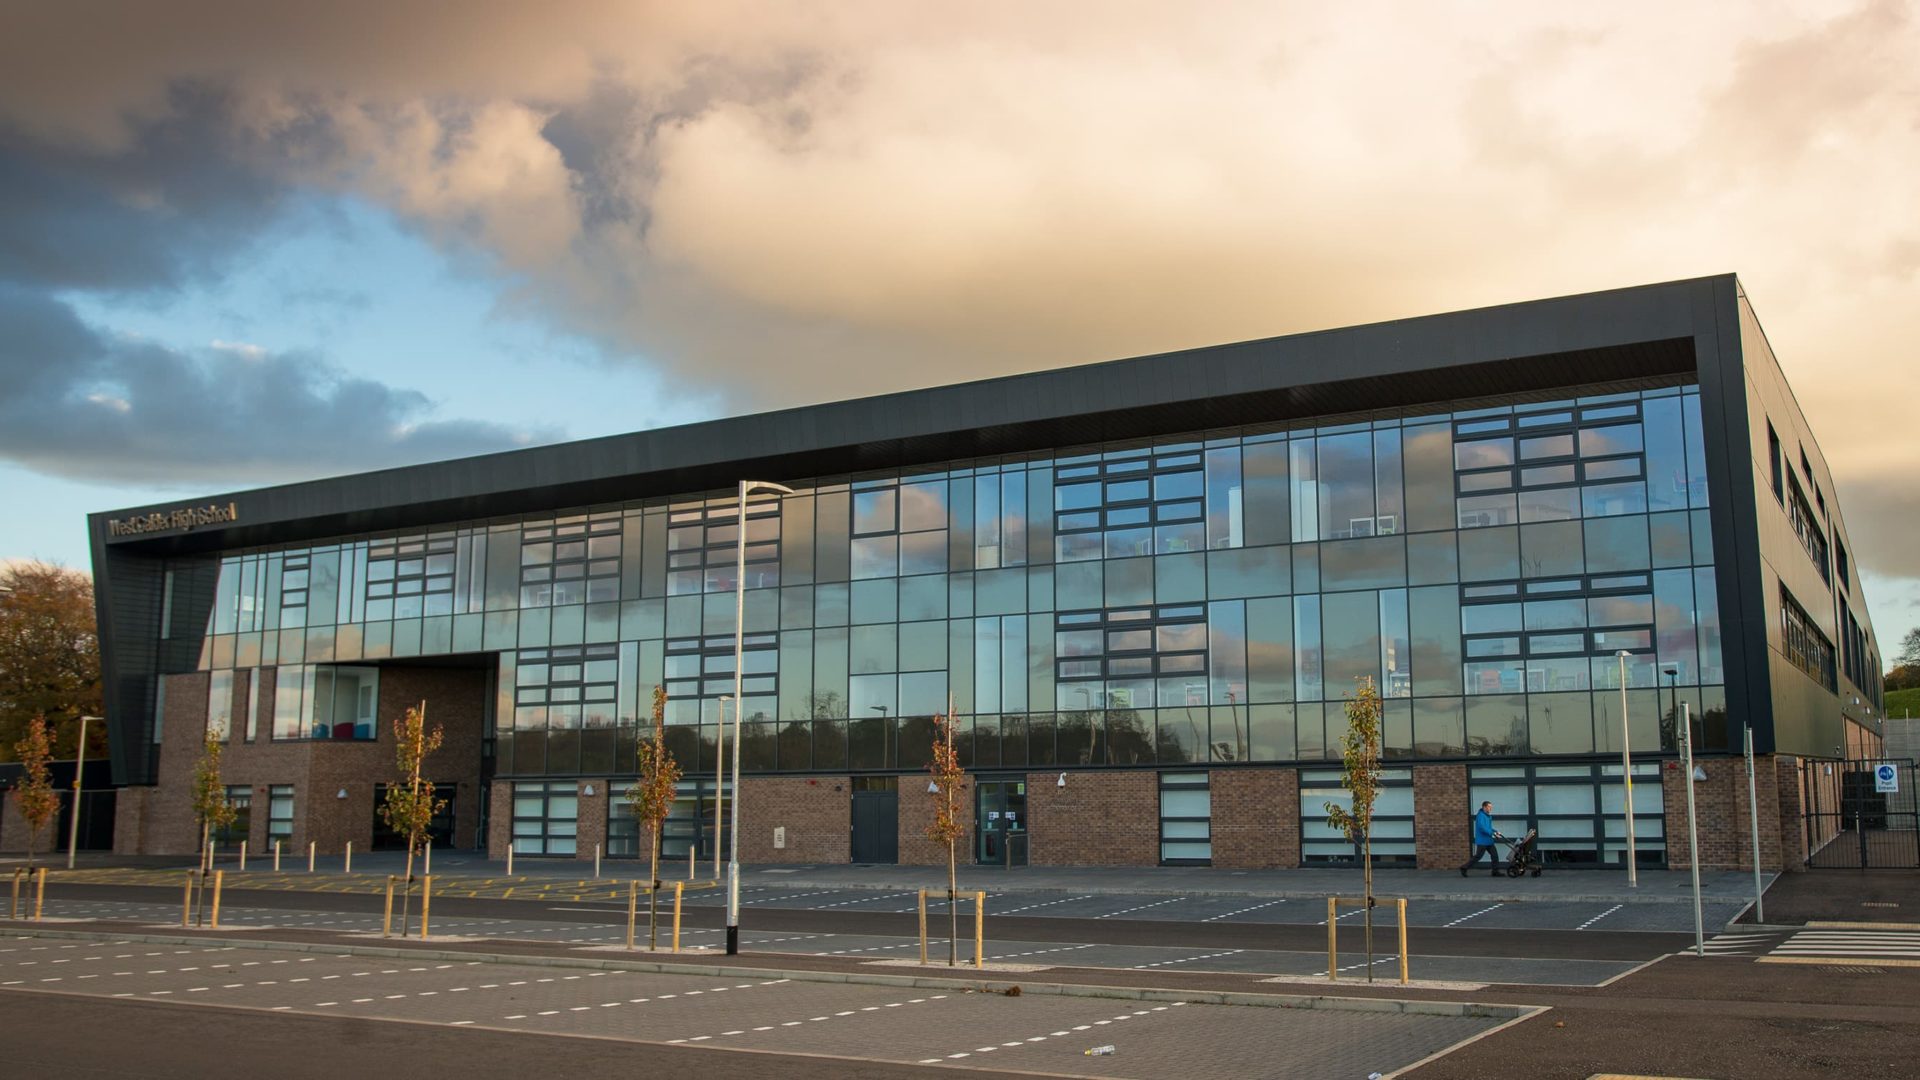 exterior of west calder high school at dawn. brick building with large windows